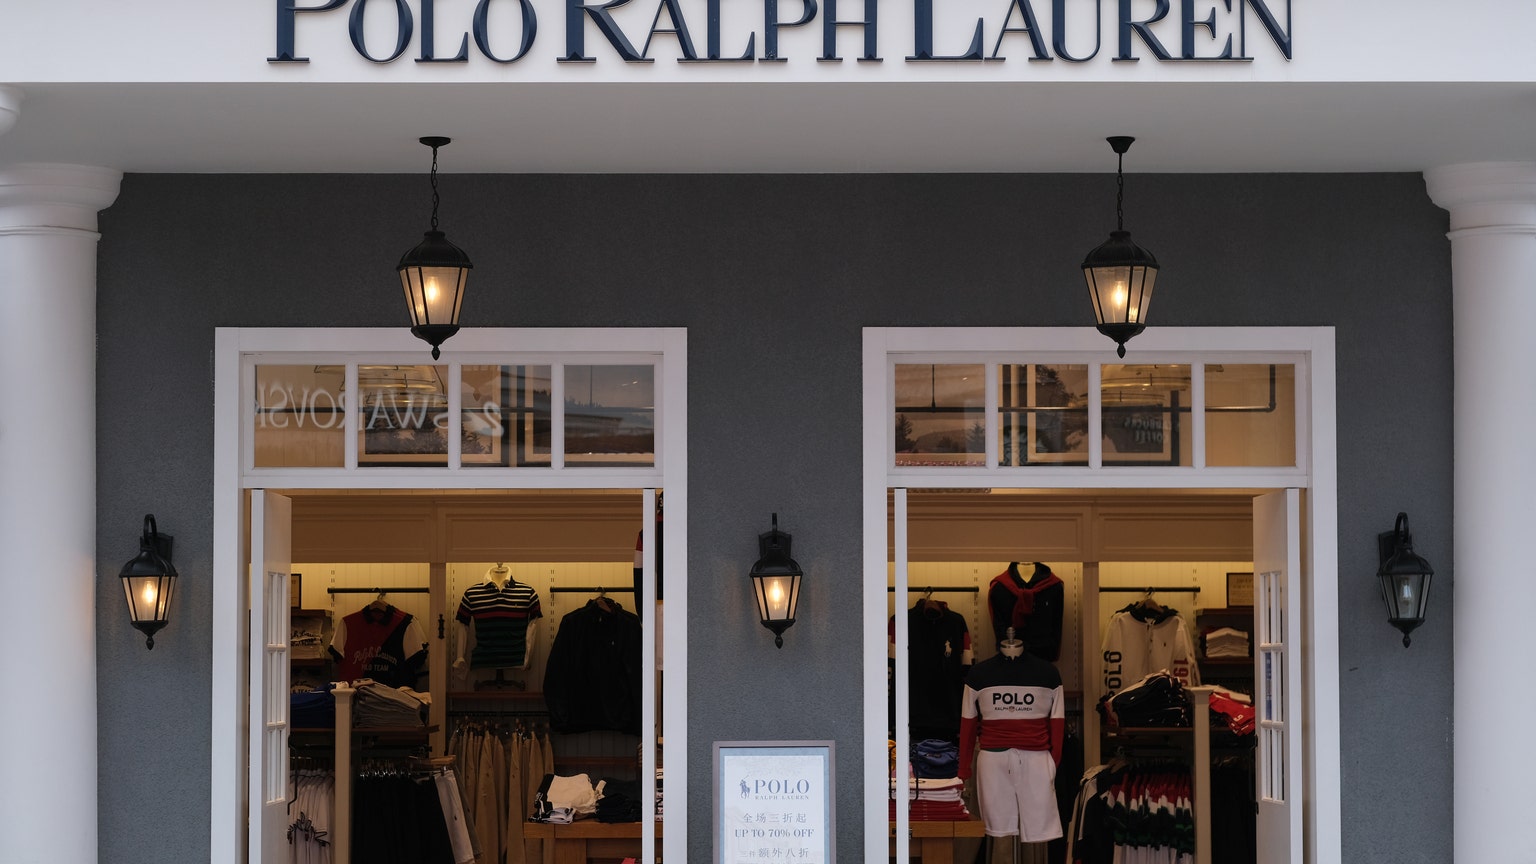 Ralph Lauren stock rises as pricing moves lift quarterly results (NYSE:RL)  | Seeking Alpha